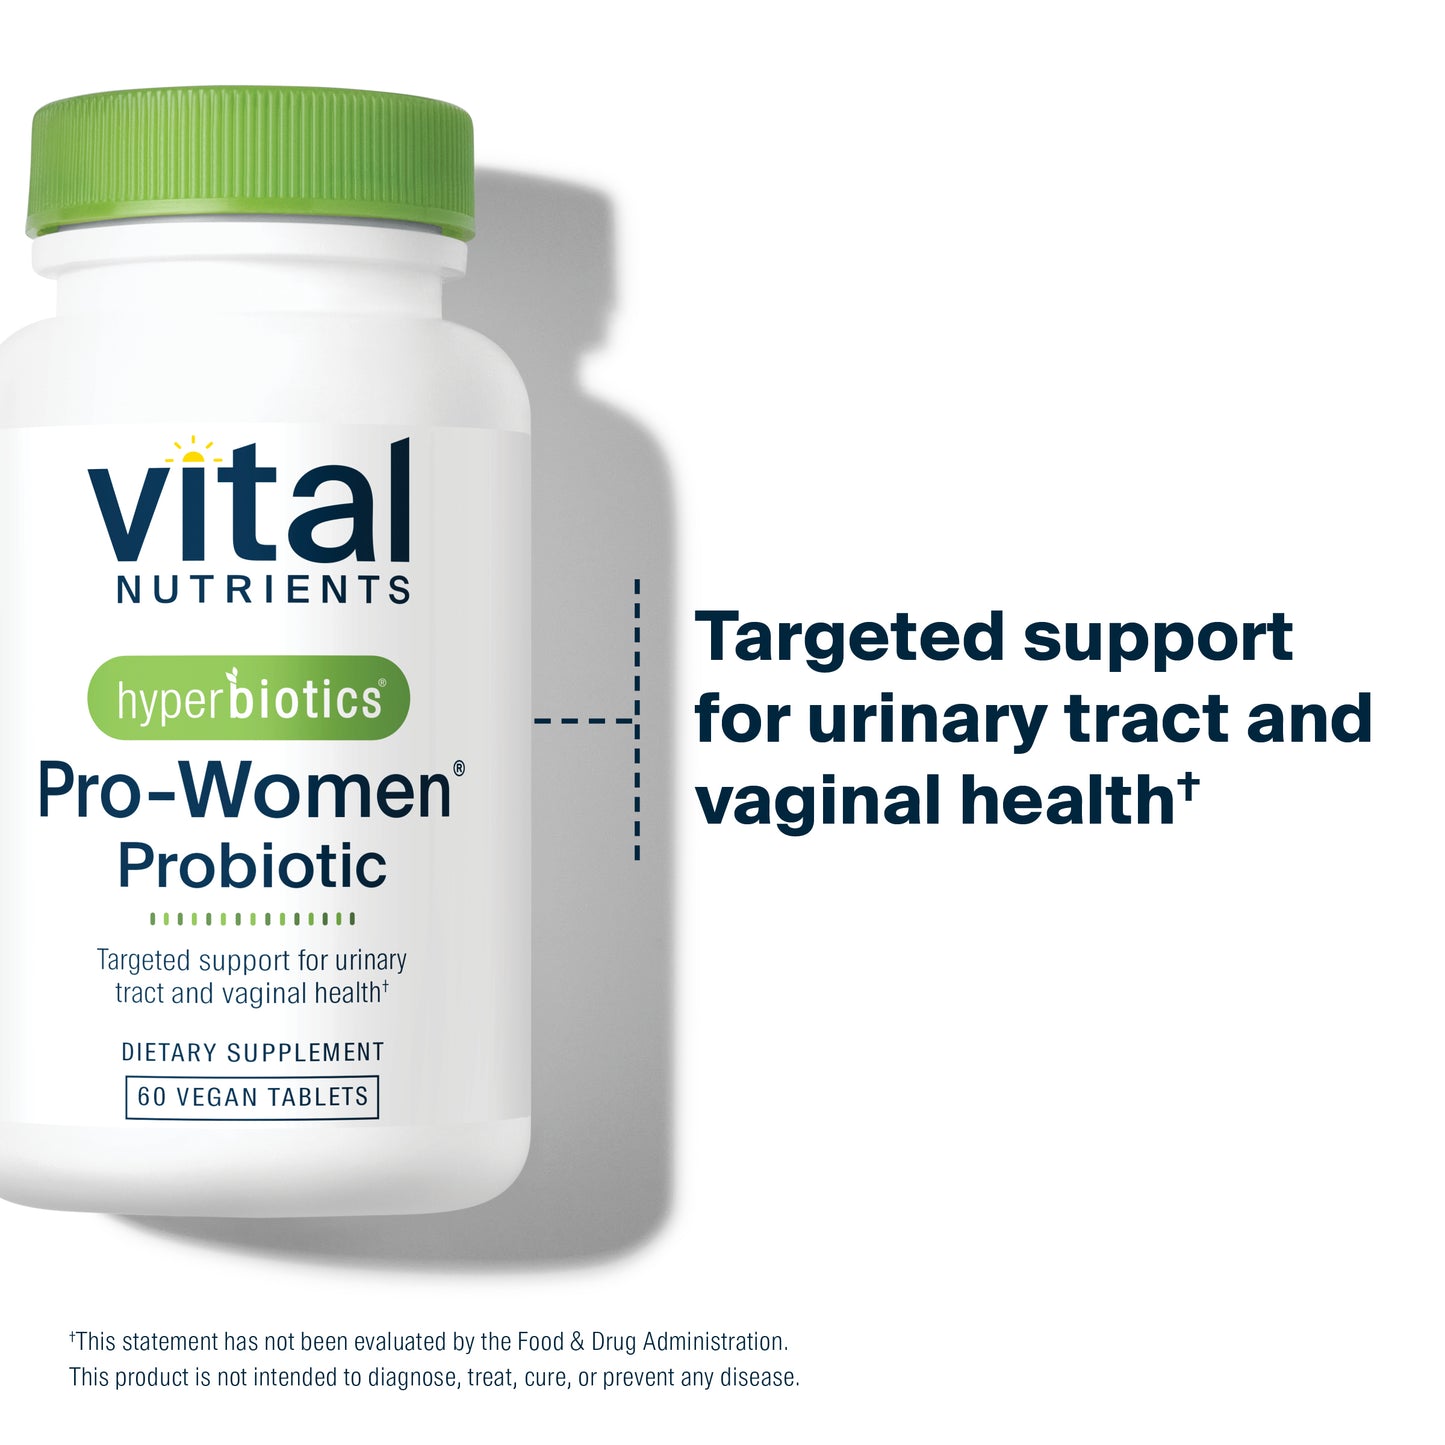 Hyperbiotics Pro-Women Probiotic 60 vegan tablets targeted support for urinary tract and vaginal health.*